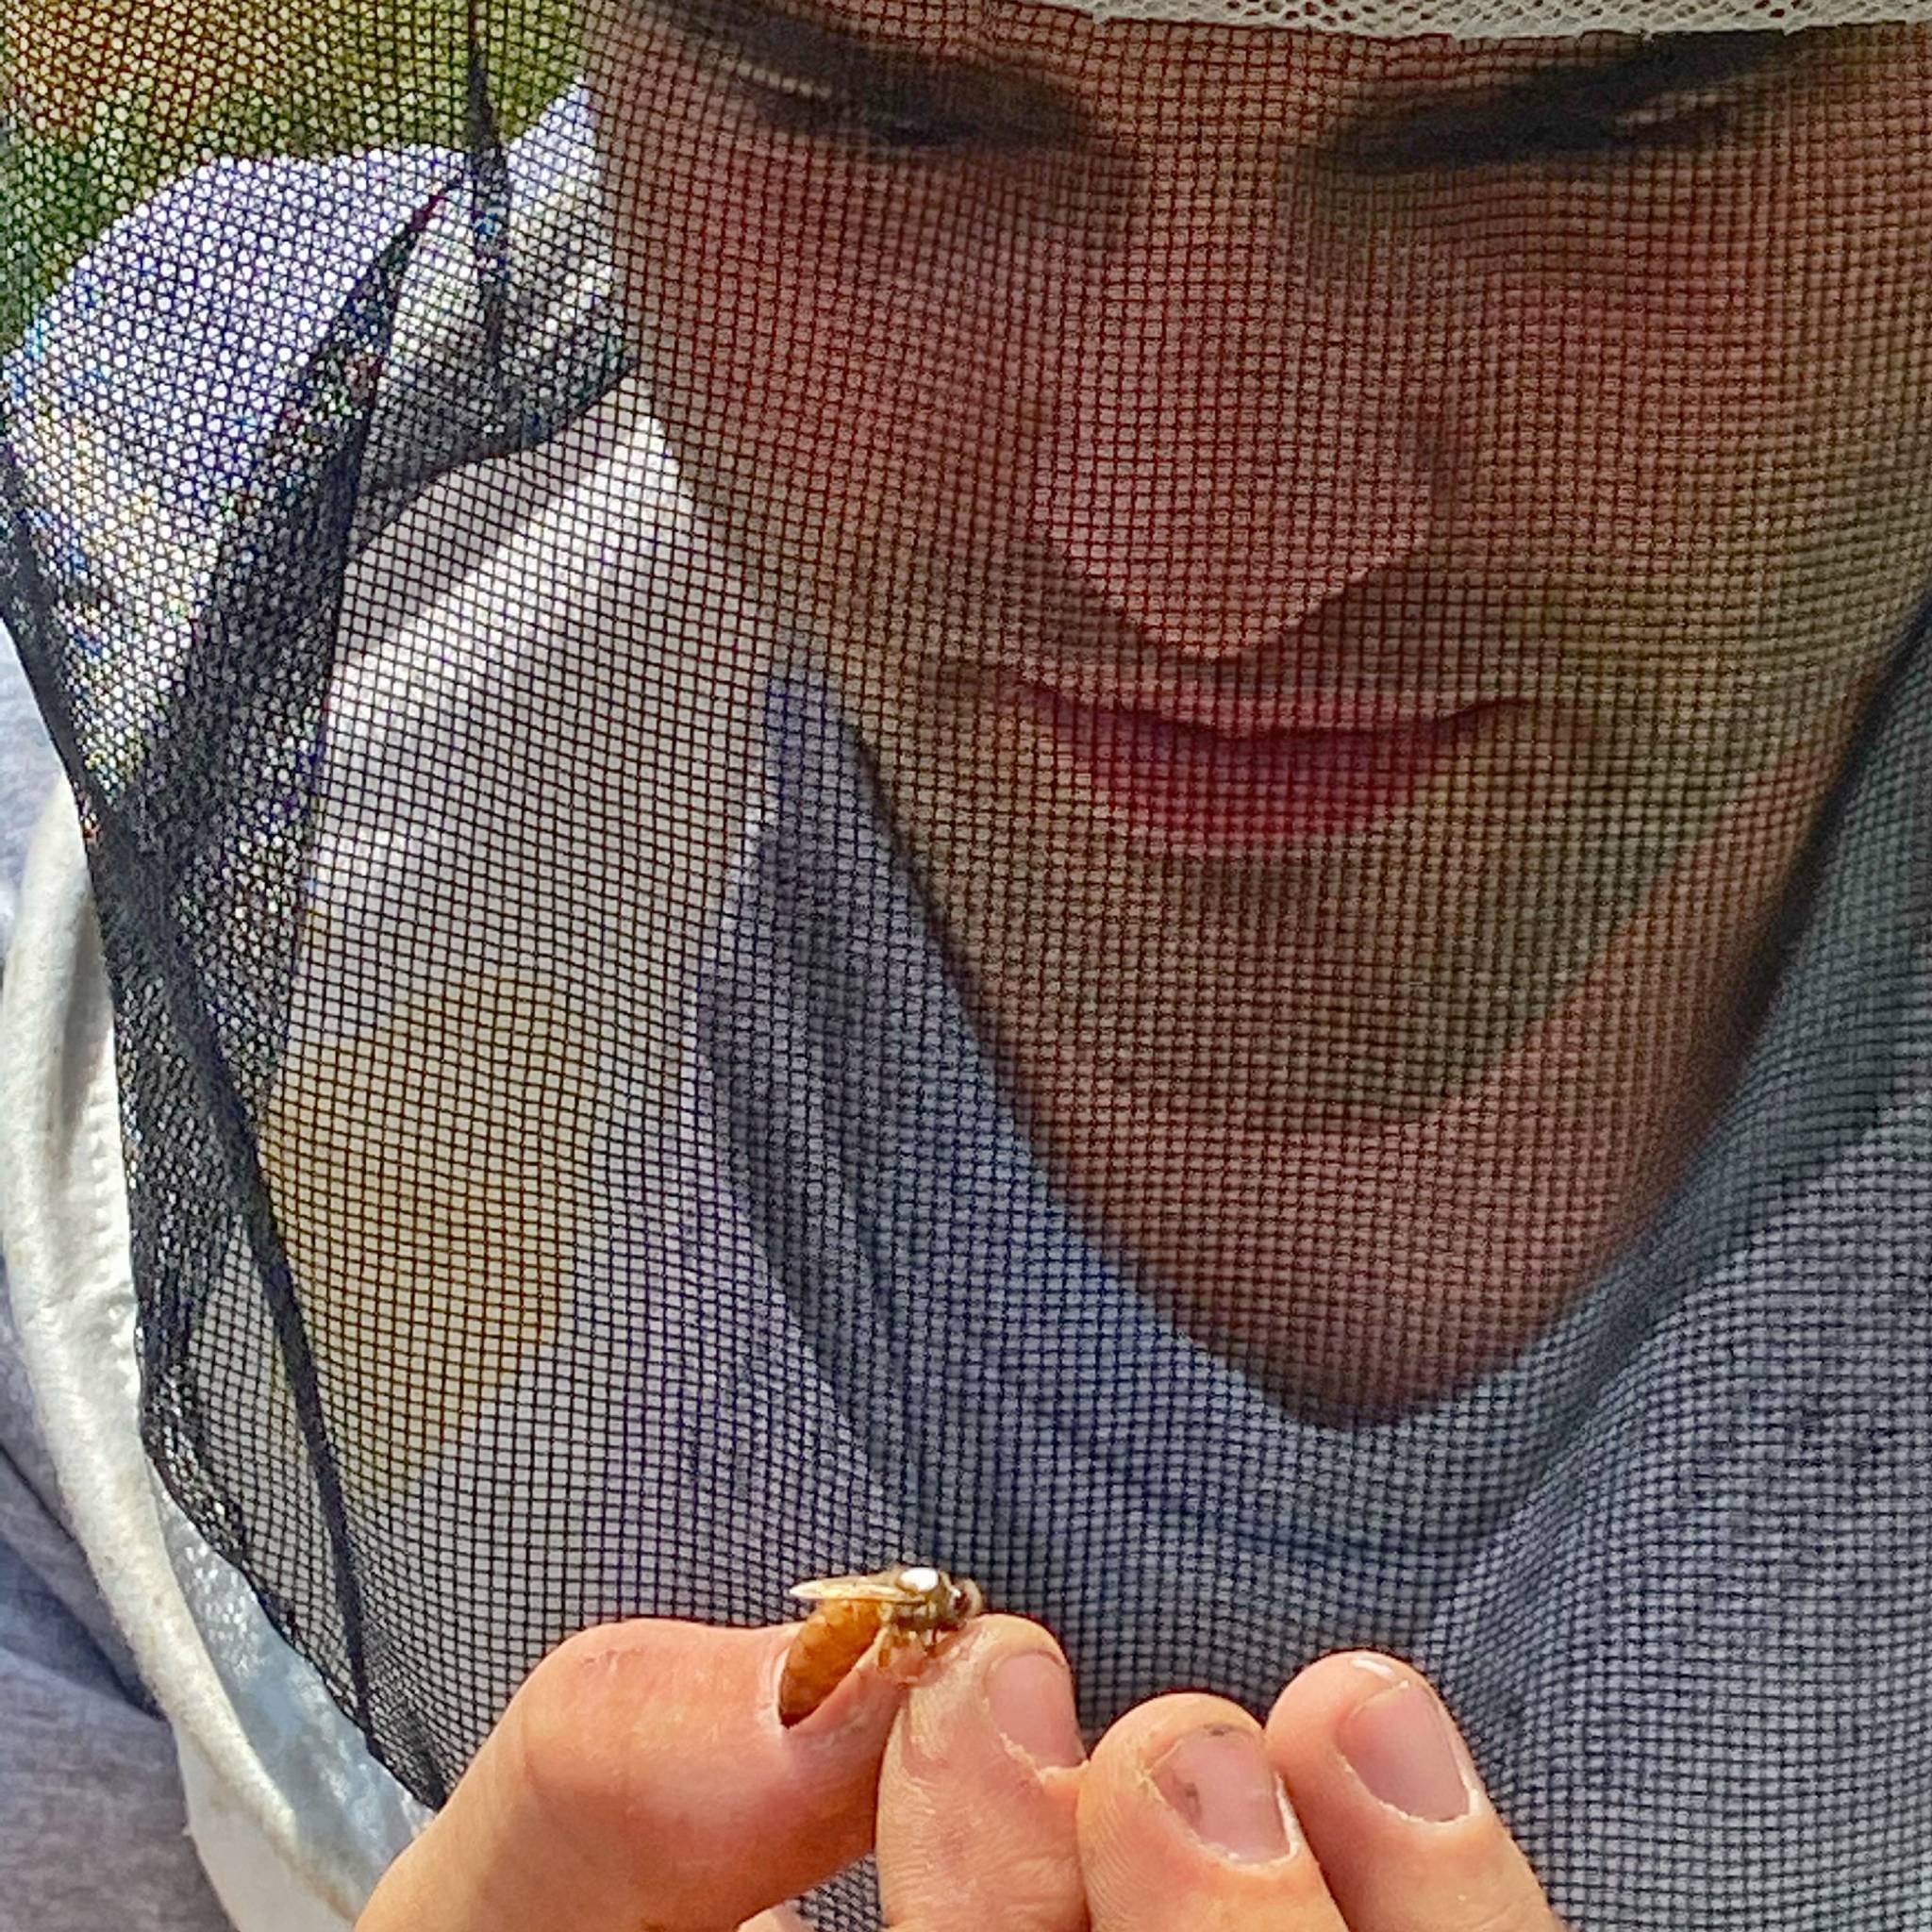 Mill Creek Apiary Apiarist examining a queen bee